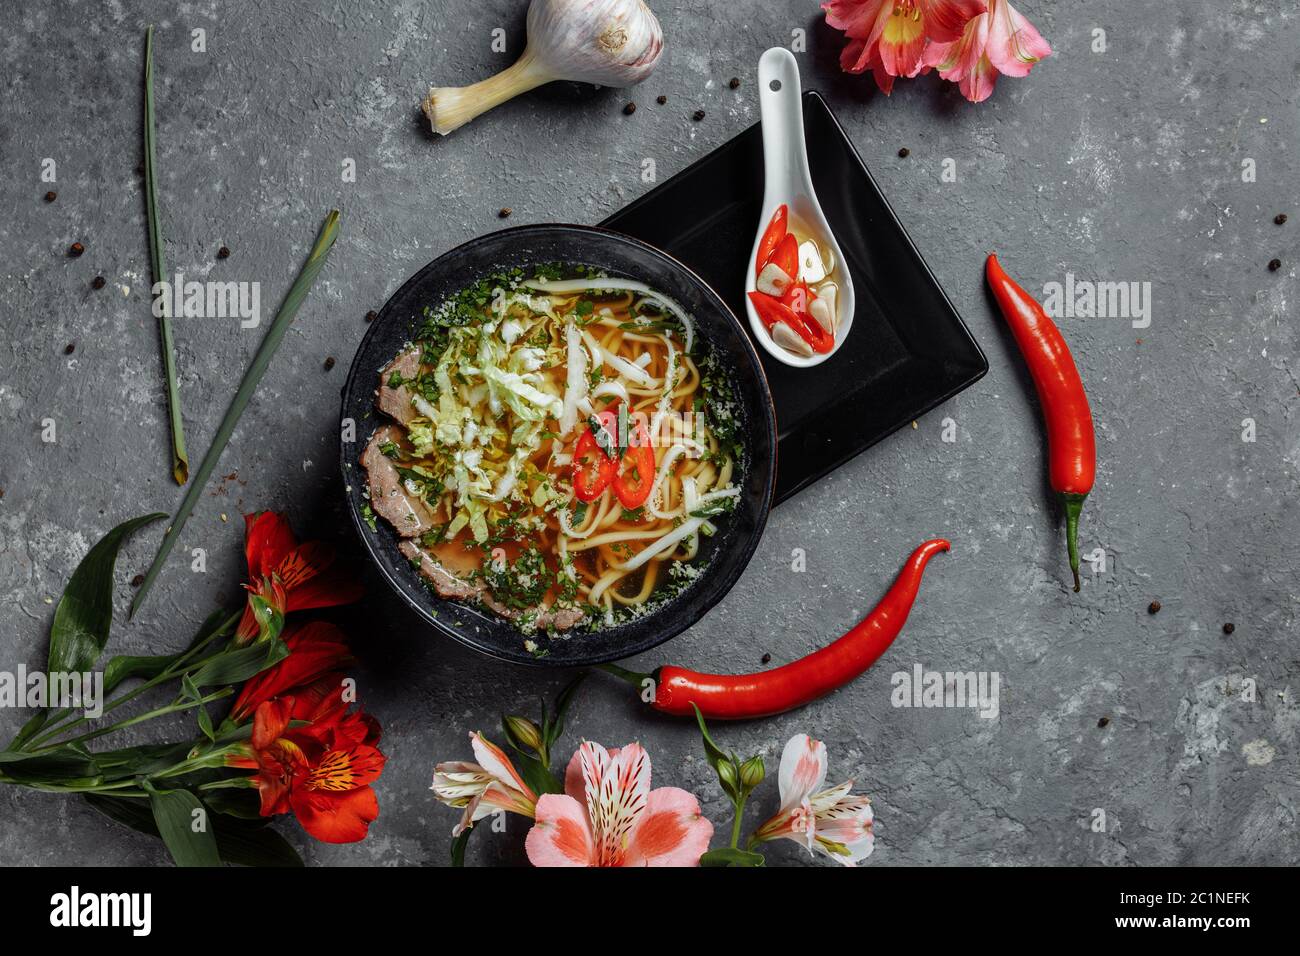 Asian cuisine, Beef soup fo in a black plate on a dark background. Soup Fo with Spicy beef broth, beef tenderloin, udon noodles, chili paste Stock Photo